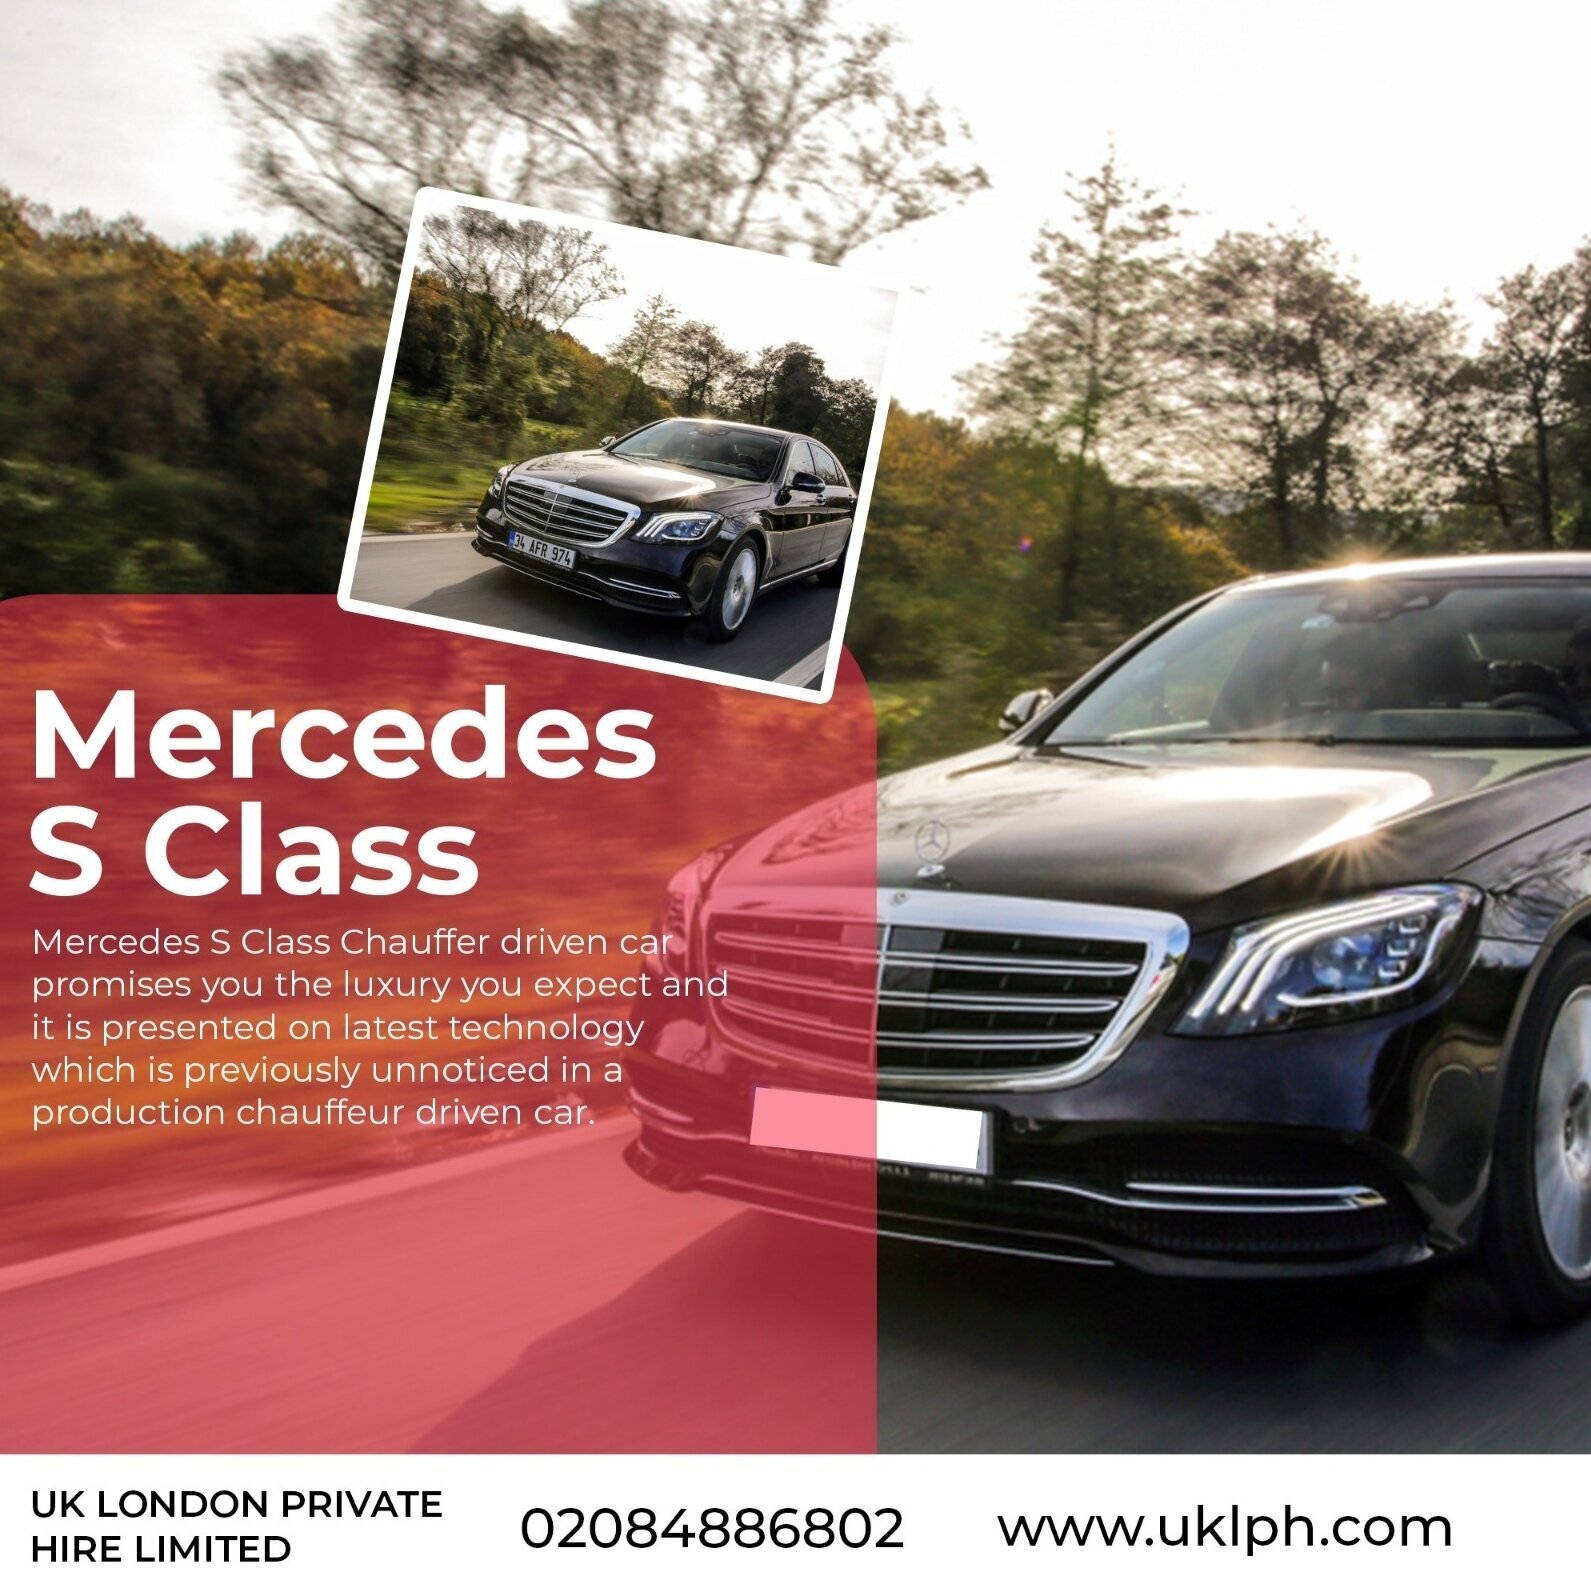 Uk London Private Hire Limited Edgware 020 3675 2385